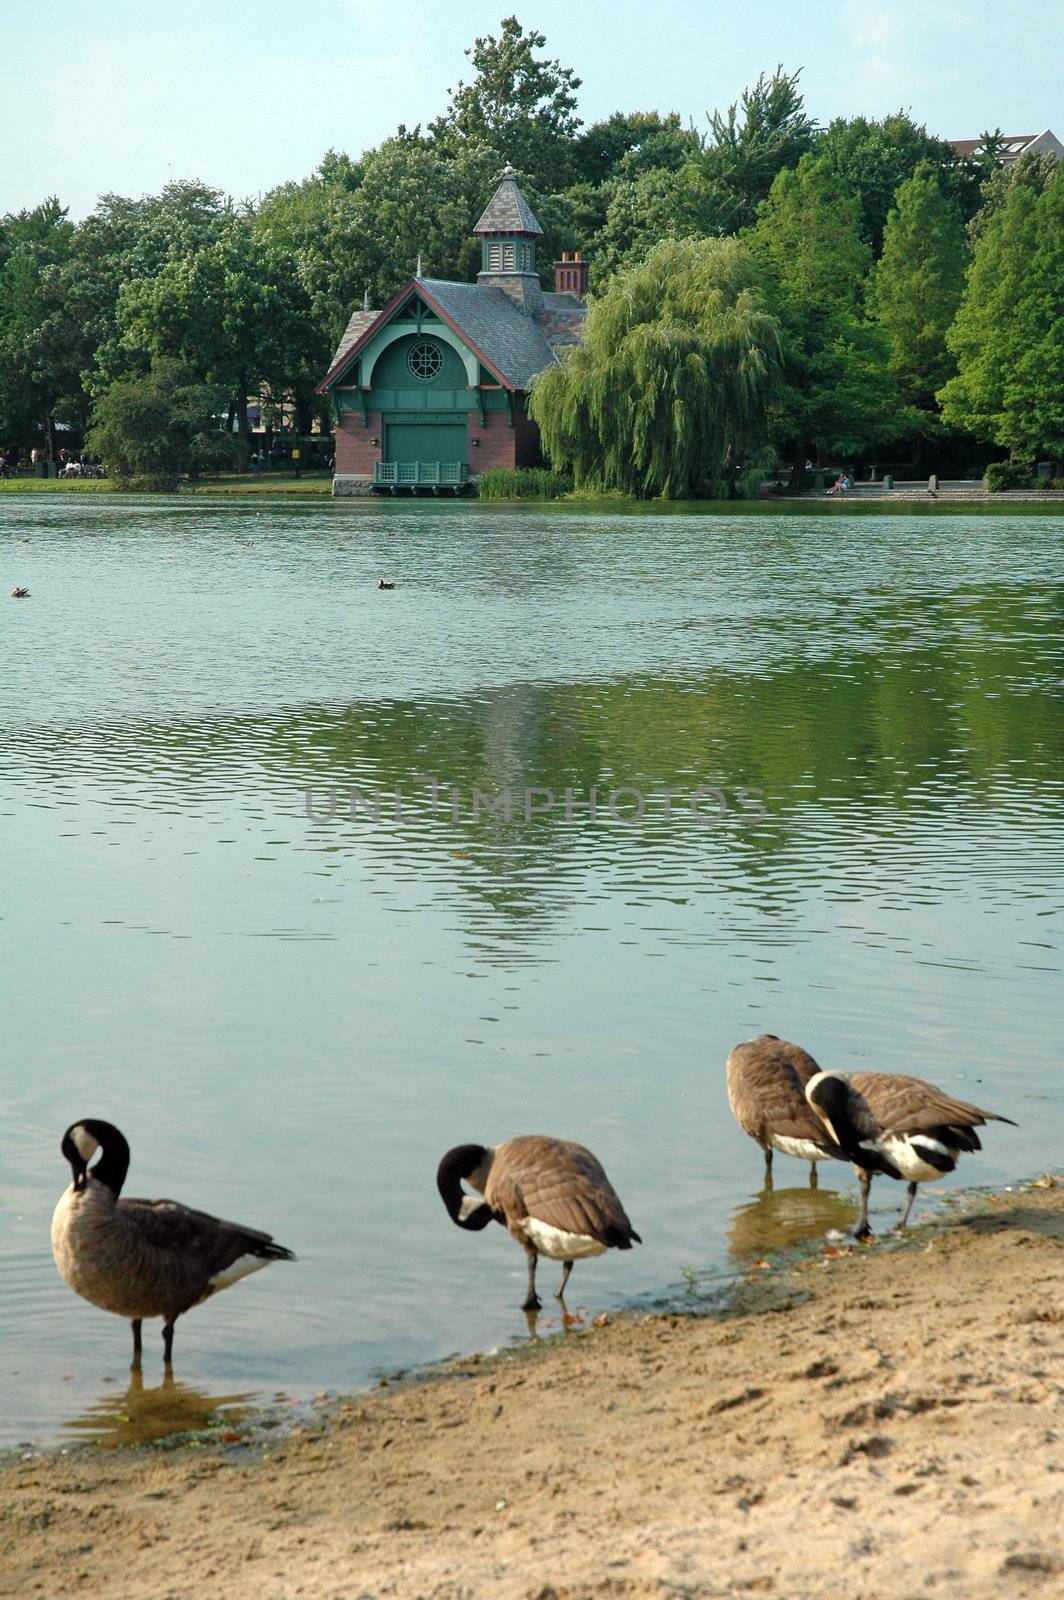 Dana Discovery Center overlooking 
Harlem Meer in Central Park, New York. ducks in foreground